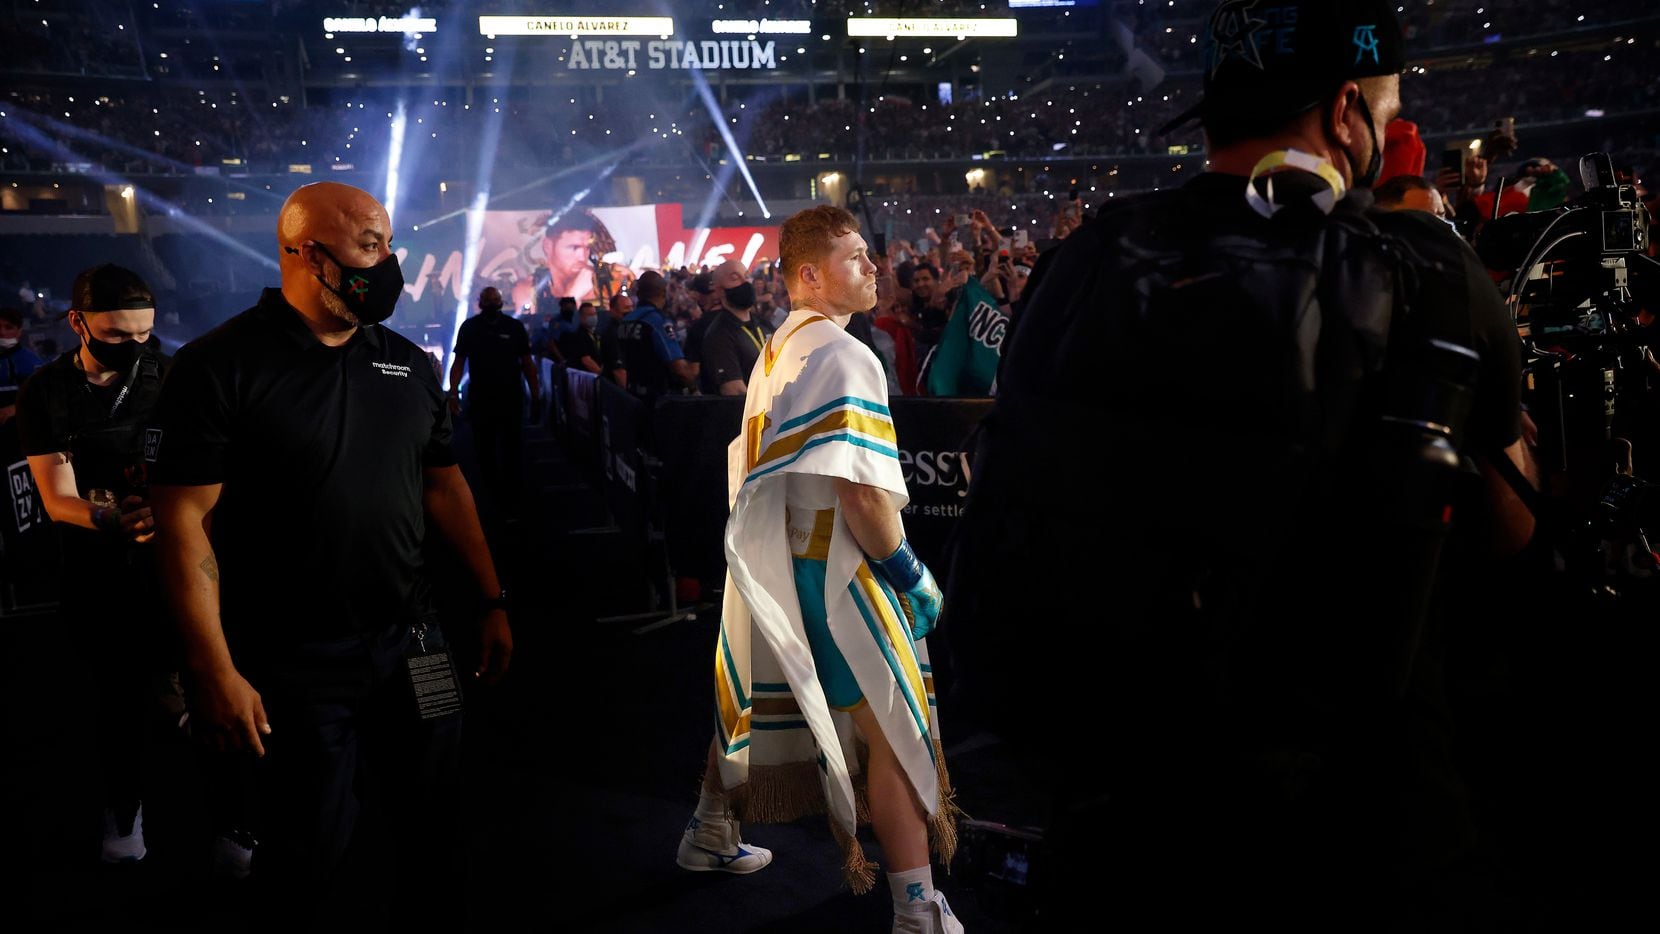 Boxer Canelo Alvarez struts to the ring as he's introduced to a mostly favorable crowd before his super middleweight title fight against Billy Joe Saunders at AT&T Stadium in Arlington, Saturday, May 8, 2021.